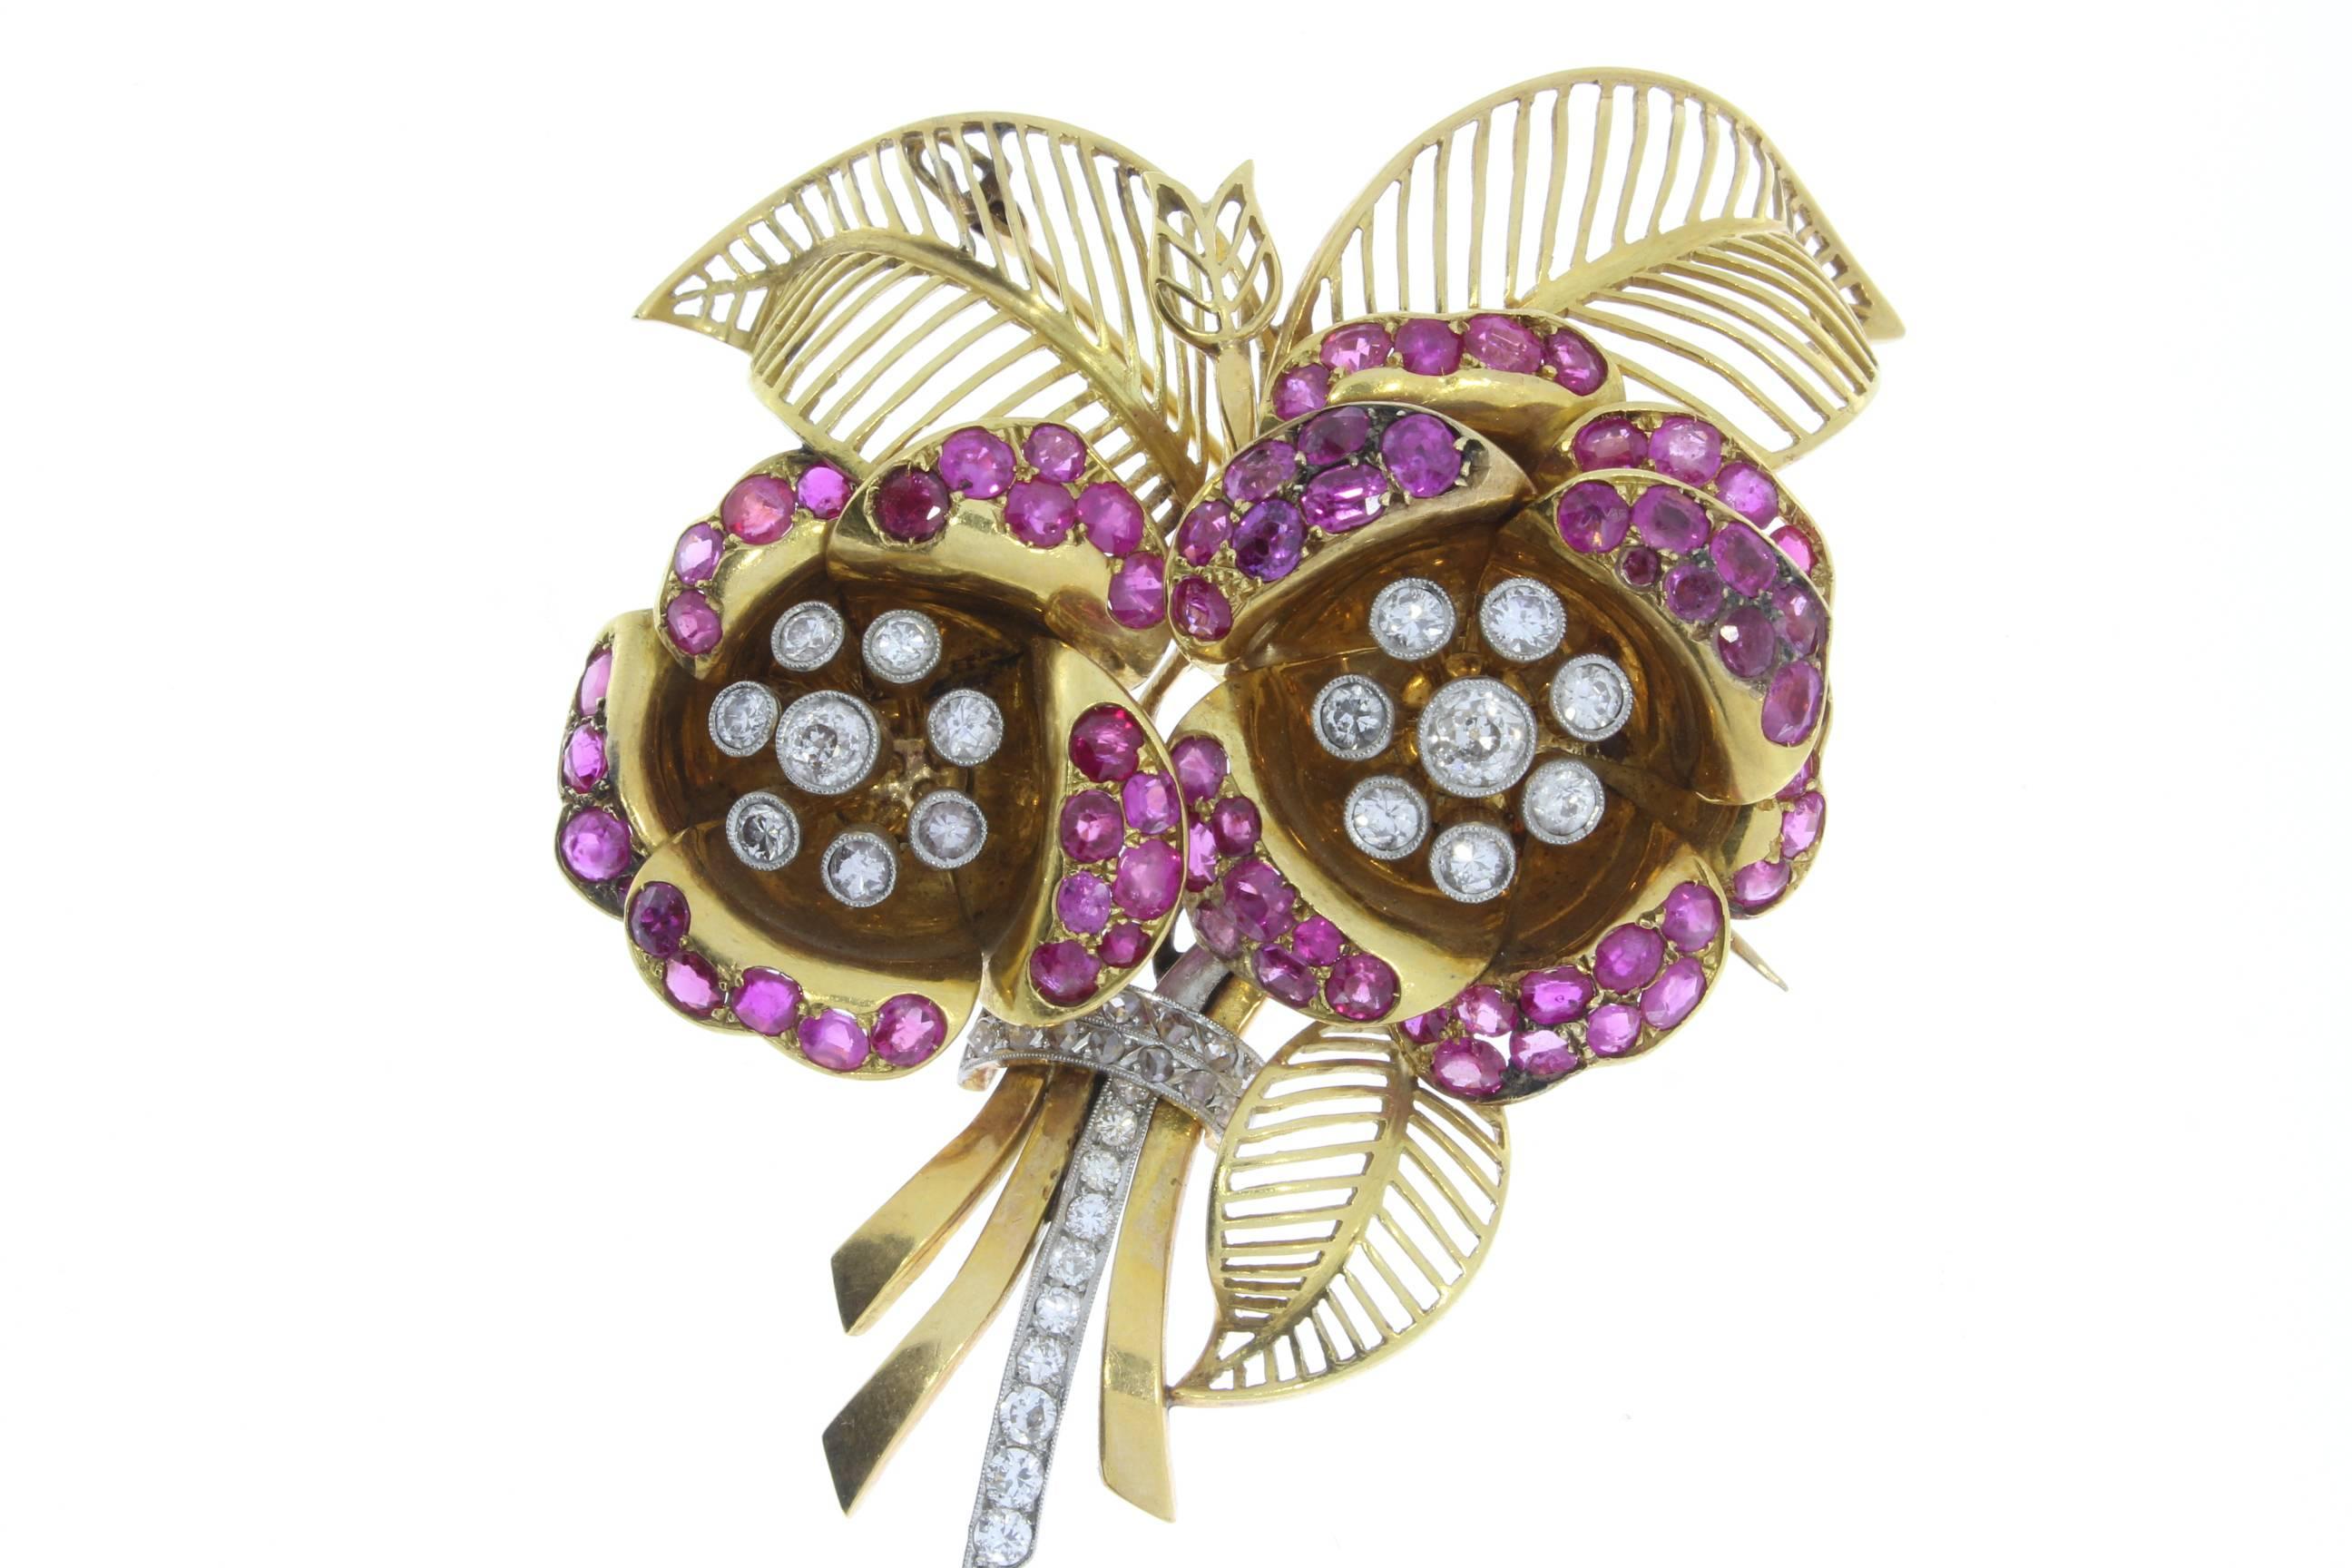 Flower-shaped brooch, decorated with 72 rubys totaling circa 7.0 ct., and 37  diamonds of good clarity, totaling circa 2.50 ct. Mounted in 18 carat yellow- and red gold in millegrain setting. 
Total weight: 54,42 g. Dimensions: 3.07 x 2.44 in ( 7,8